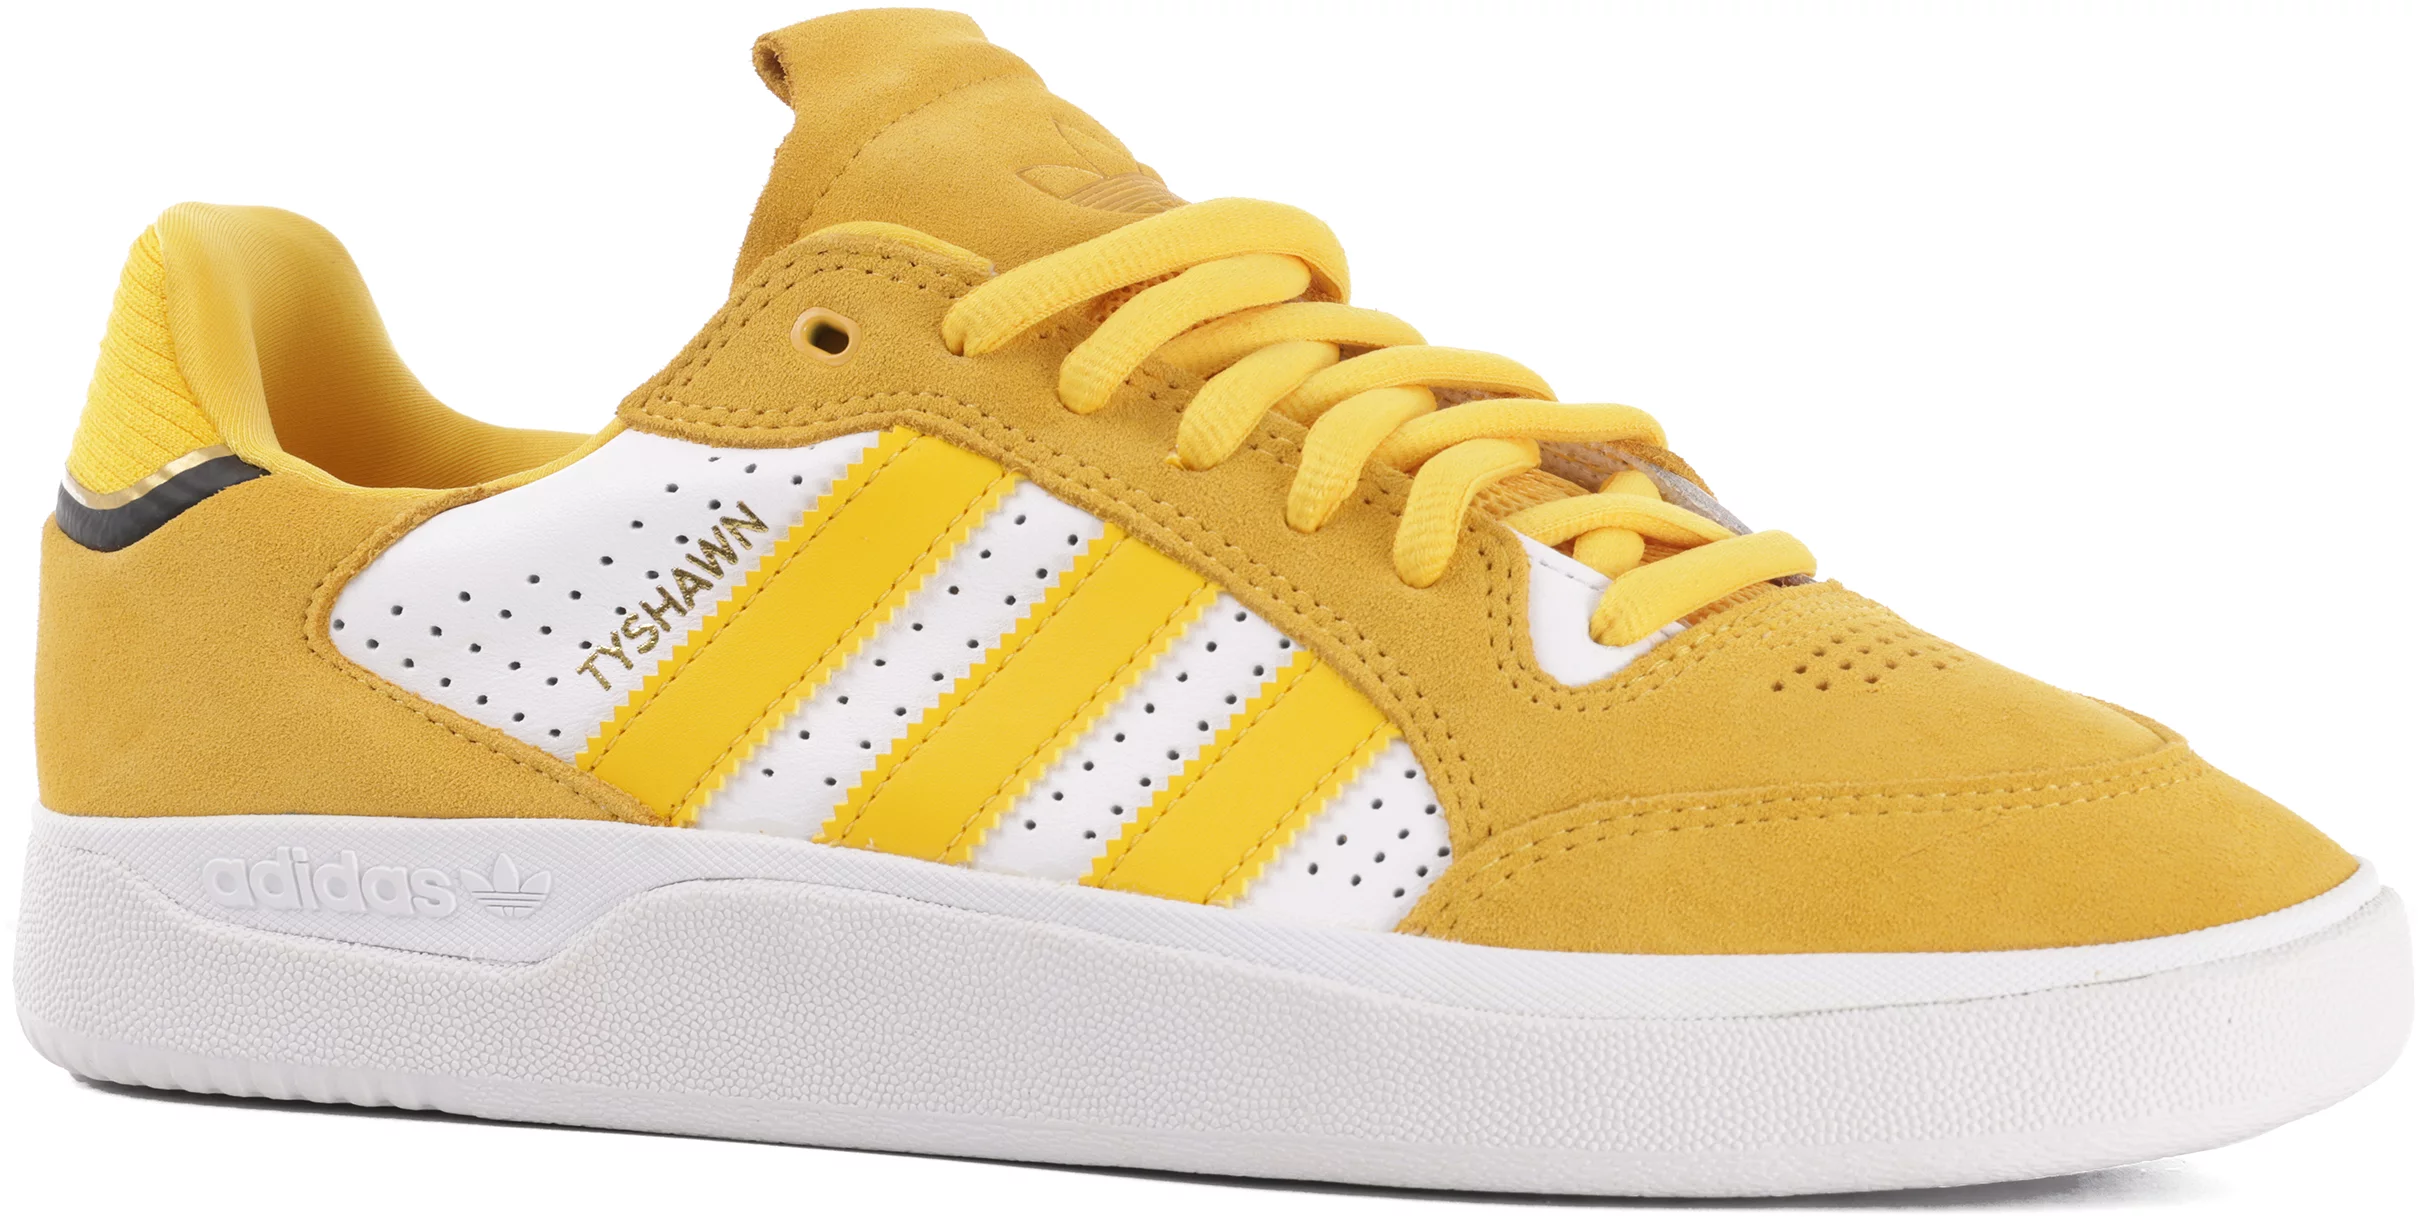 Adidas Tyshawn Low Skate Shoes - bold gold/footwear white/core